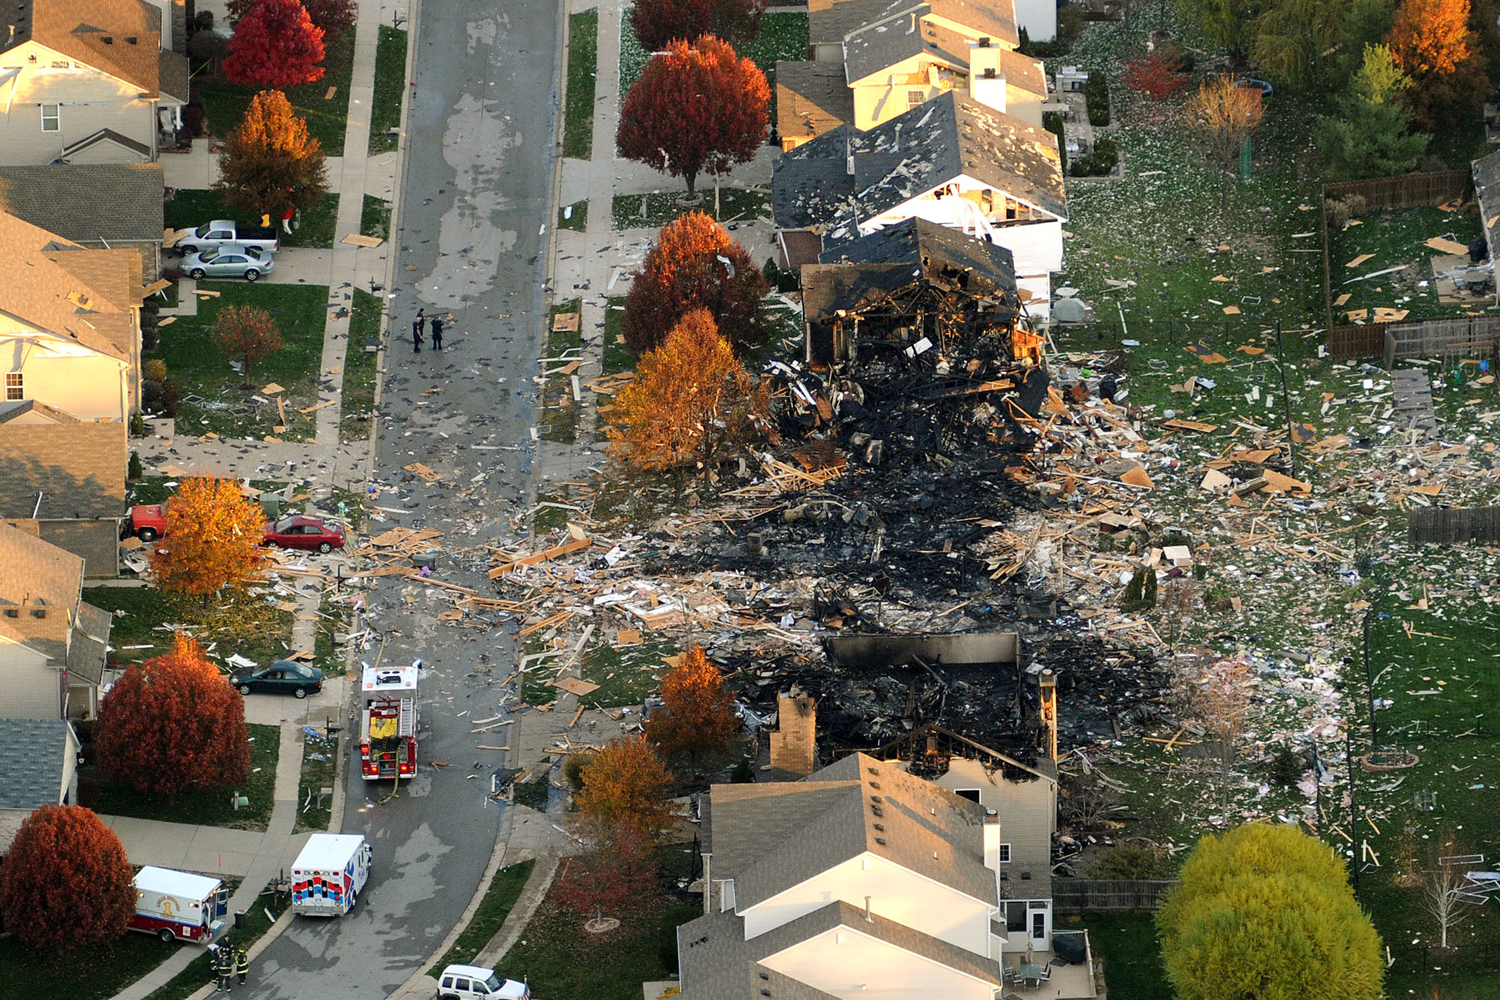 Image: Nov. 11, 2012. Two homes were leveled and numerous neighboring homes were damaged by a massive explosion that sparked a huge fire and killed two people in Indianapolis.